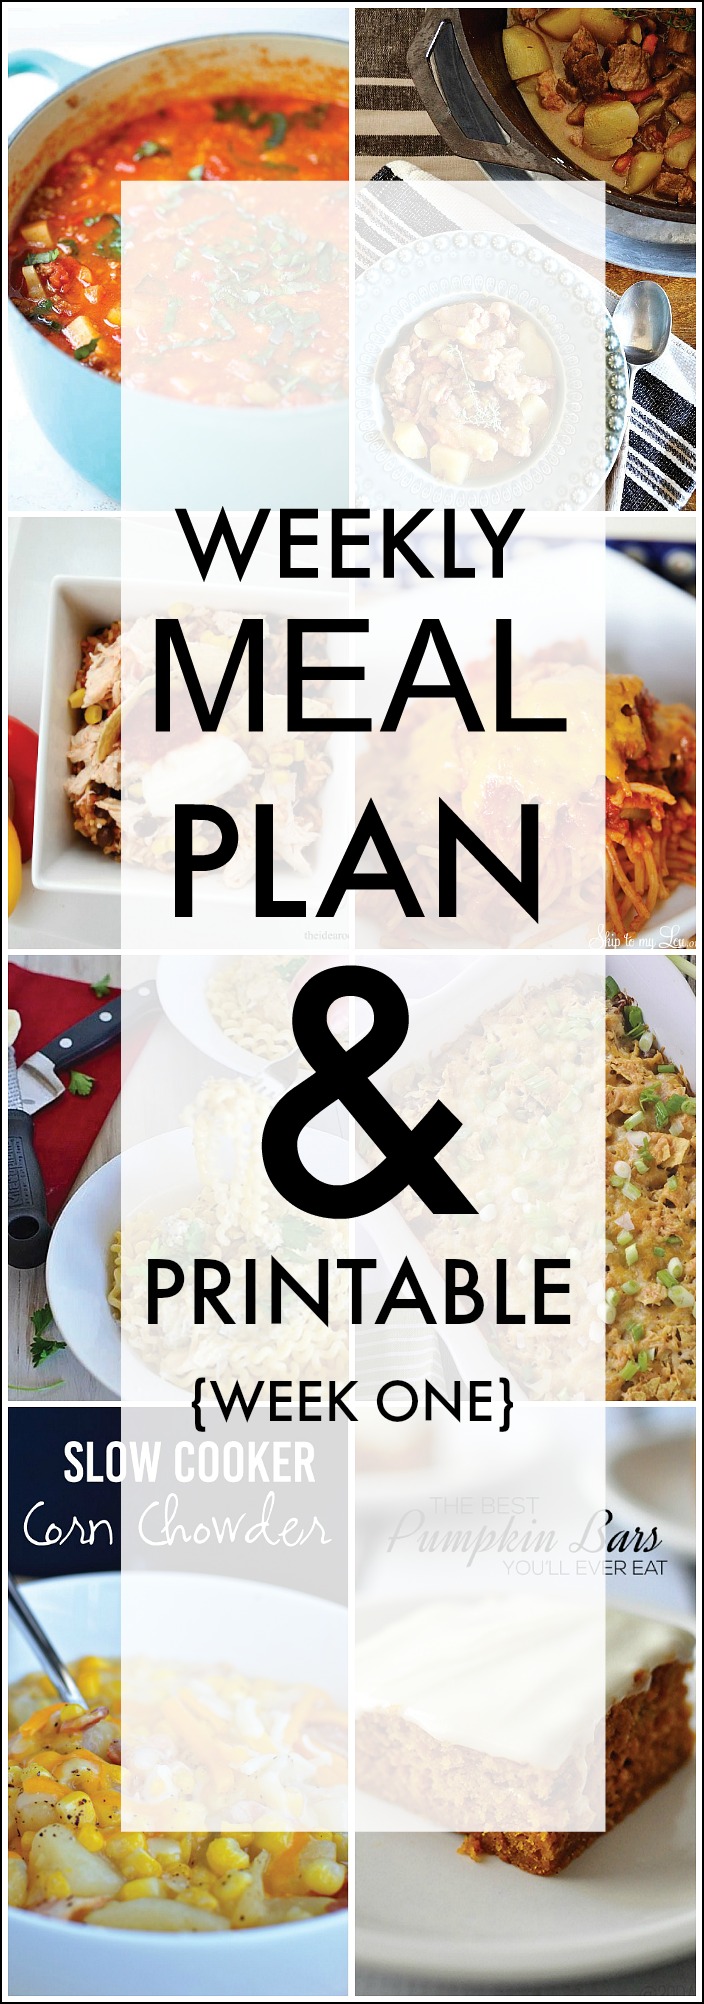 Weekly Meal Plan from your favorite bloggers! These main dish recipes and yummy dessert are perfect for weekly meals. These recipes are easy and delicious! PIN IT NOW AND MAKE THEM LATER!